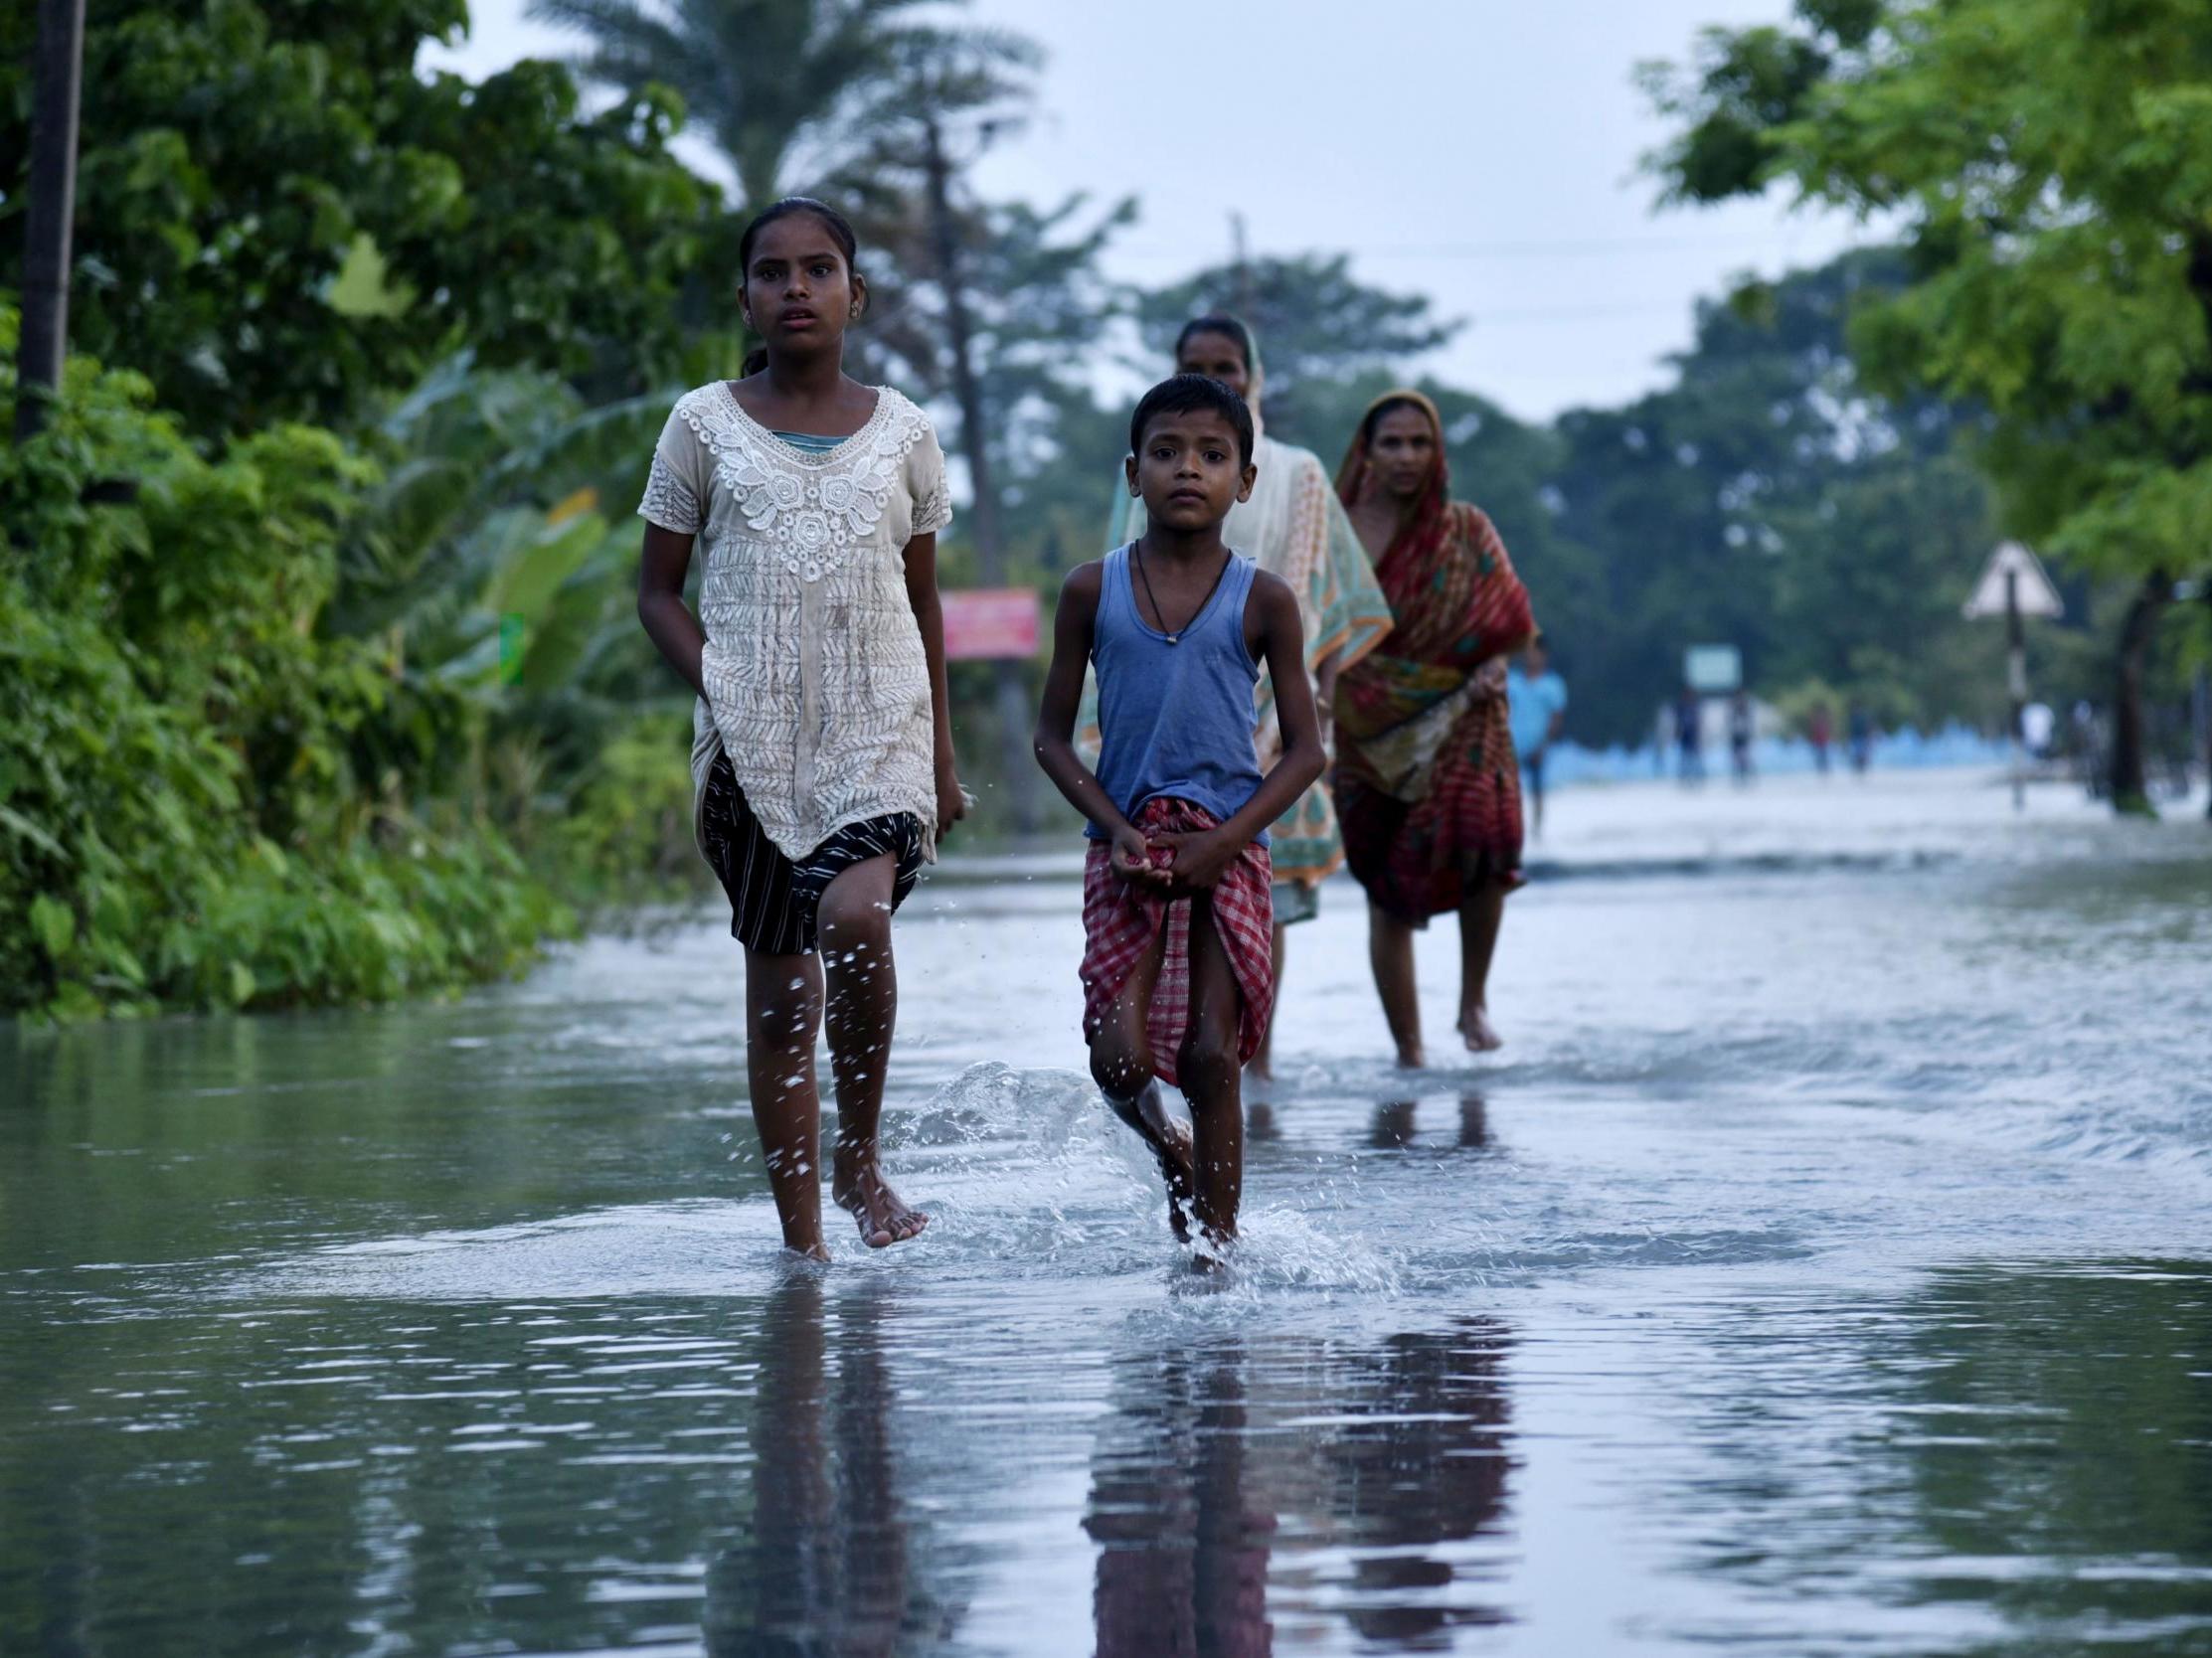 People walk through flood waters in India after a heavy monsoon this year